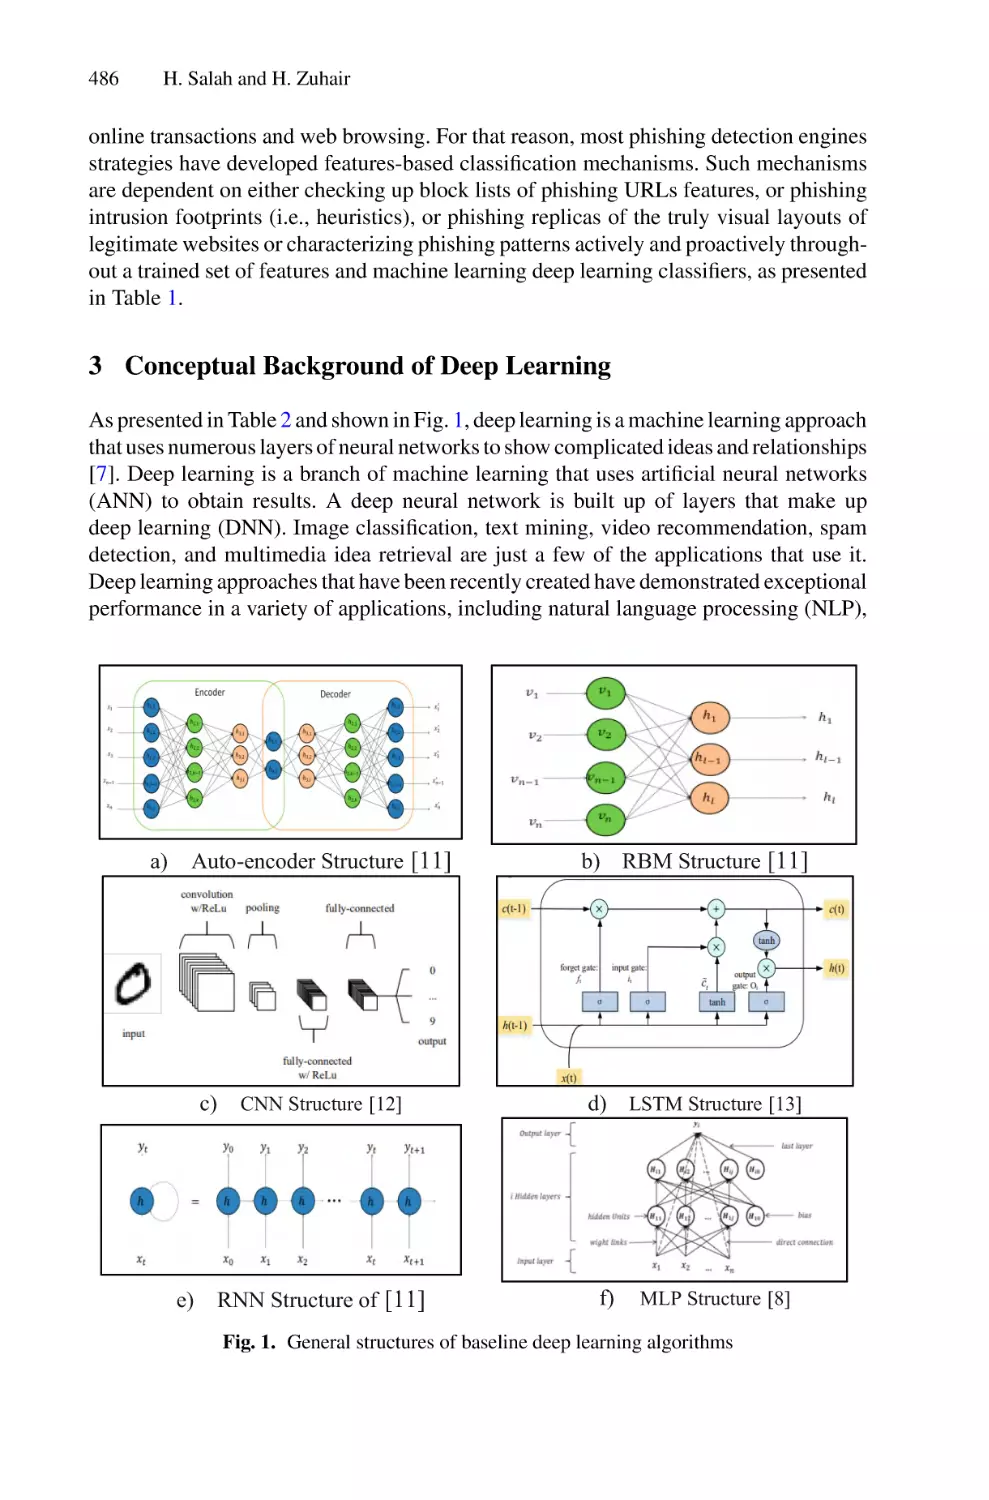 3 Conceptual Background of Deep Learning